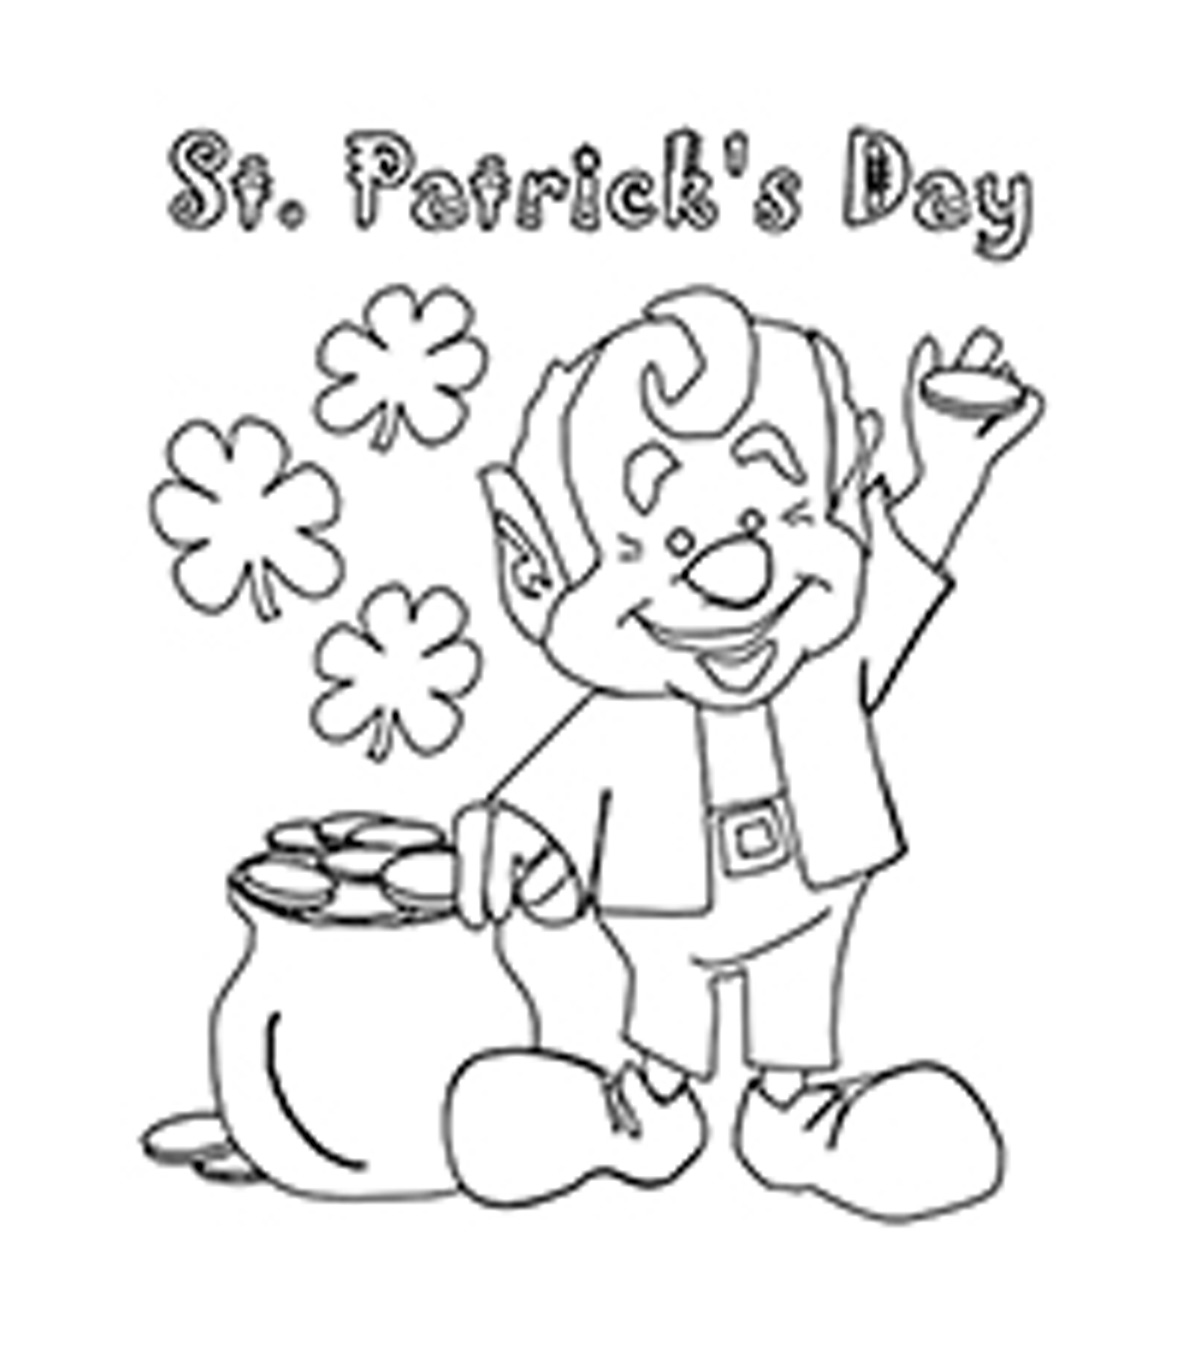 25 Best St. Patrick’s Day Coloring Pages For Your Little Ones